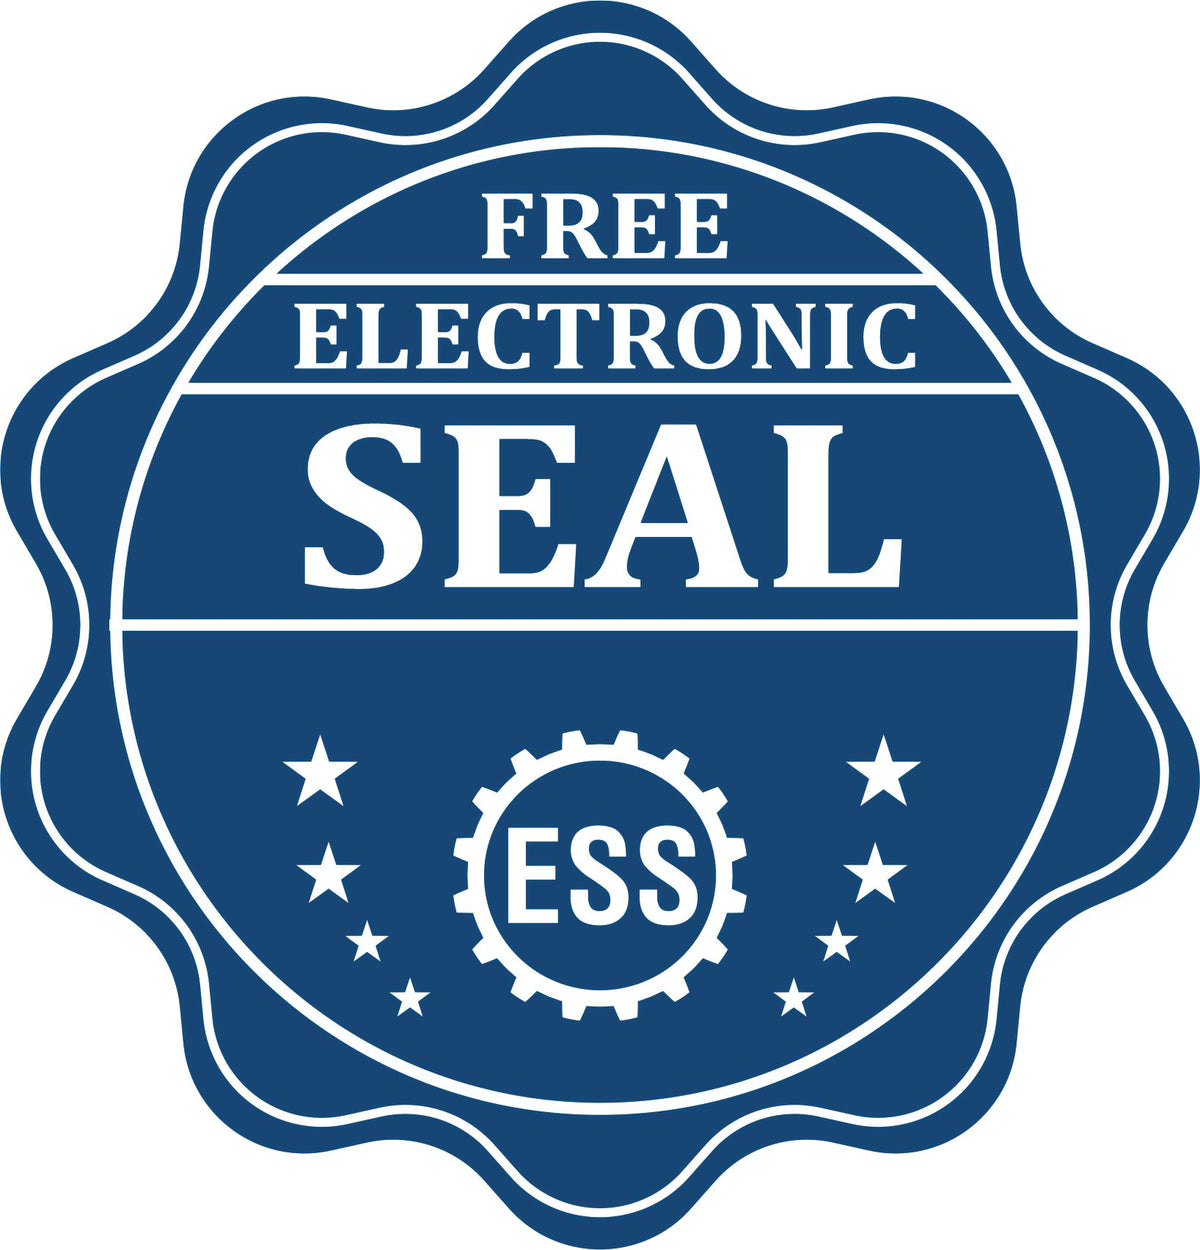 A badge showing a free electronic seal for the State of New Jersey Extended Long Reach Engineer Seal with stars and the ESS gear on the emblem.